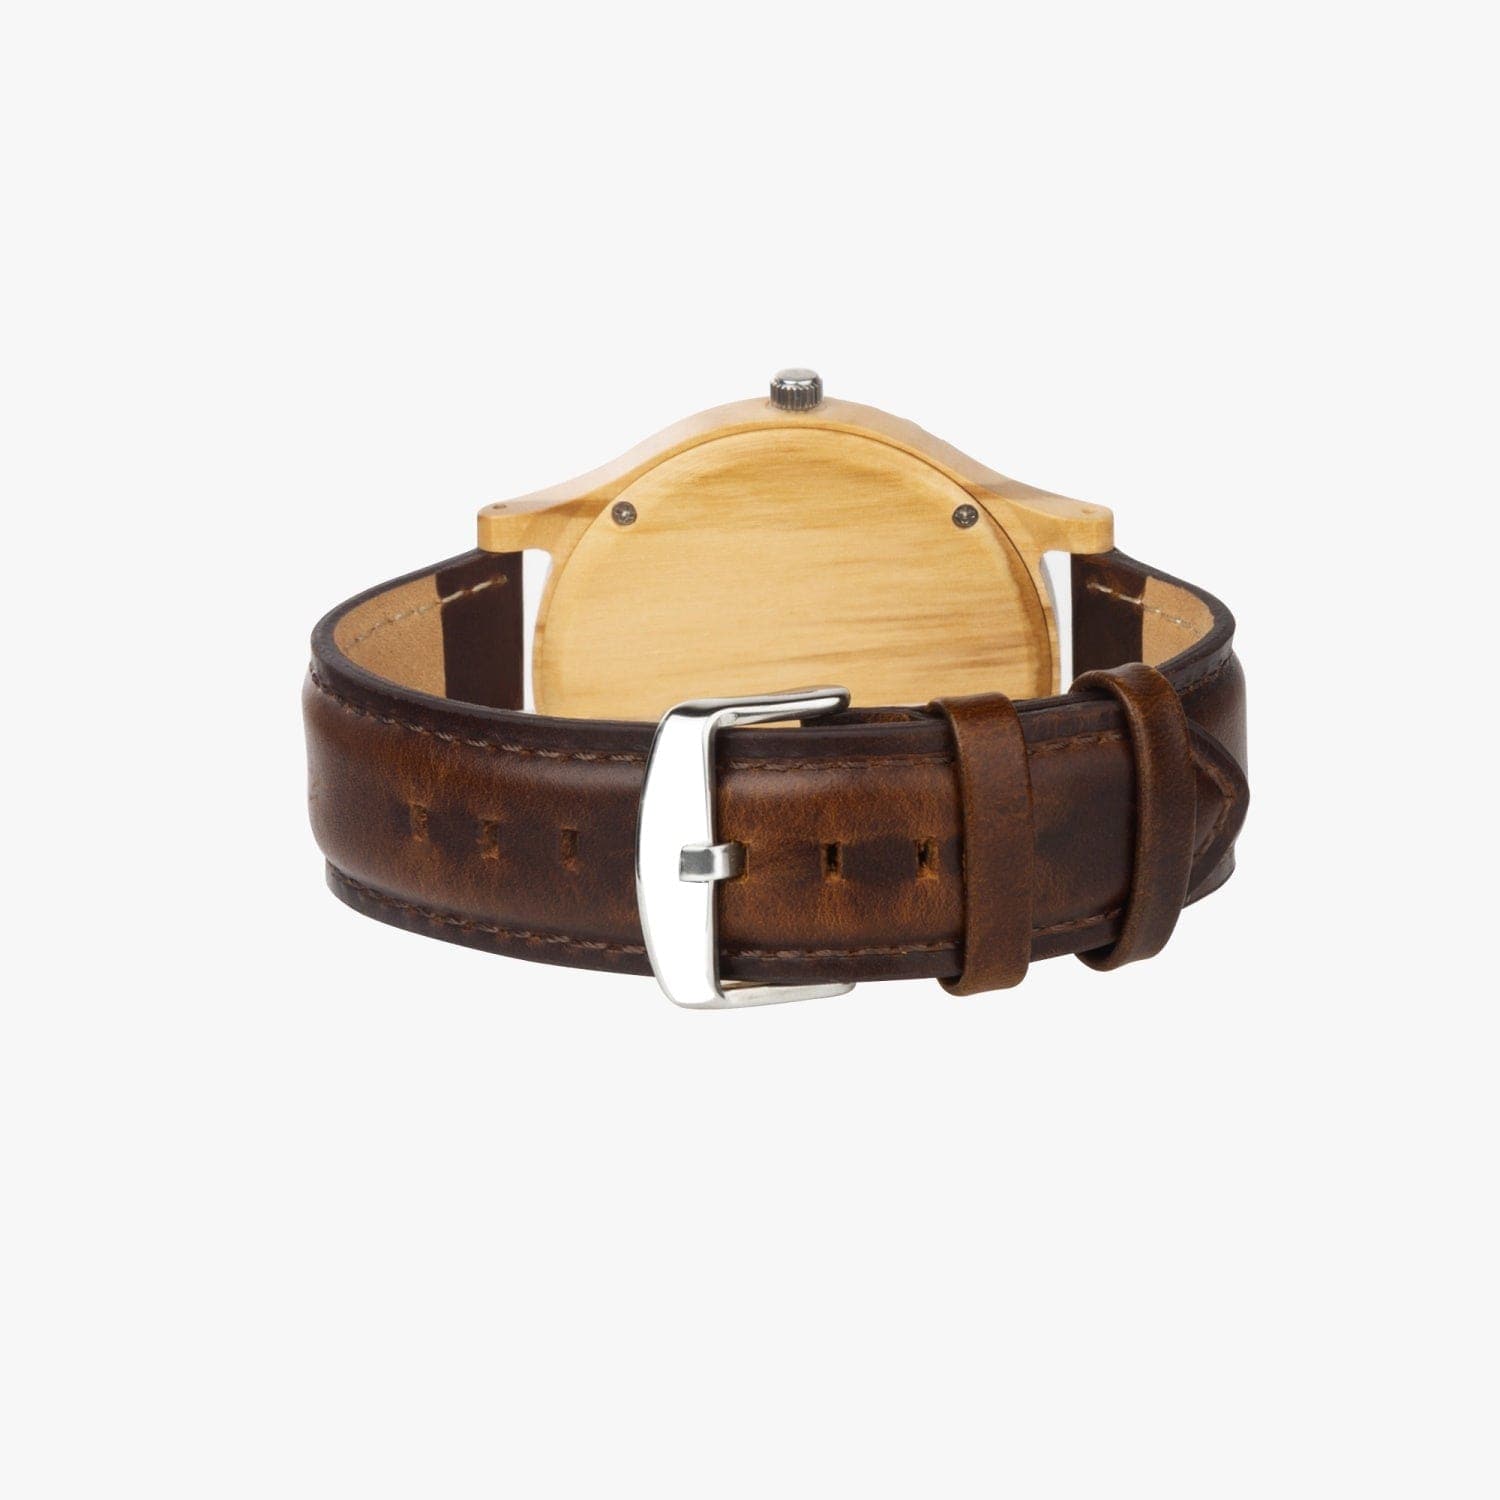 Time slips by. Italian Olive Lumber Wooden Watch - Leather Strap.  Designer watch by Sensus Studio Design